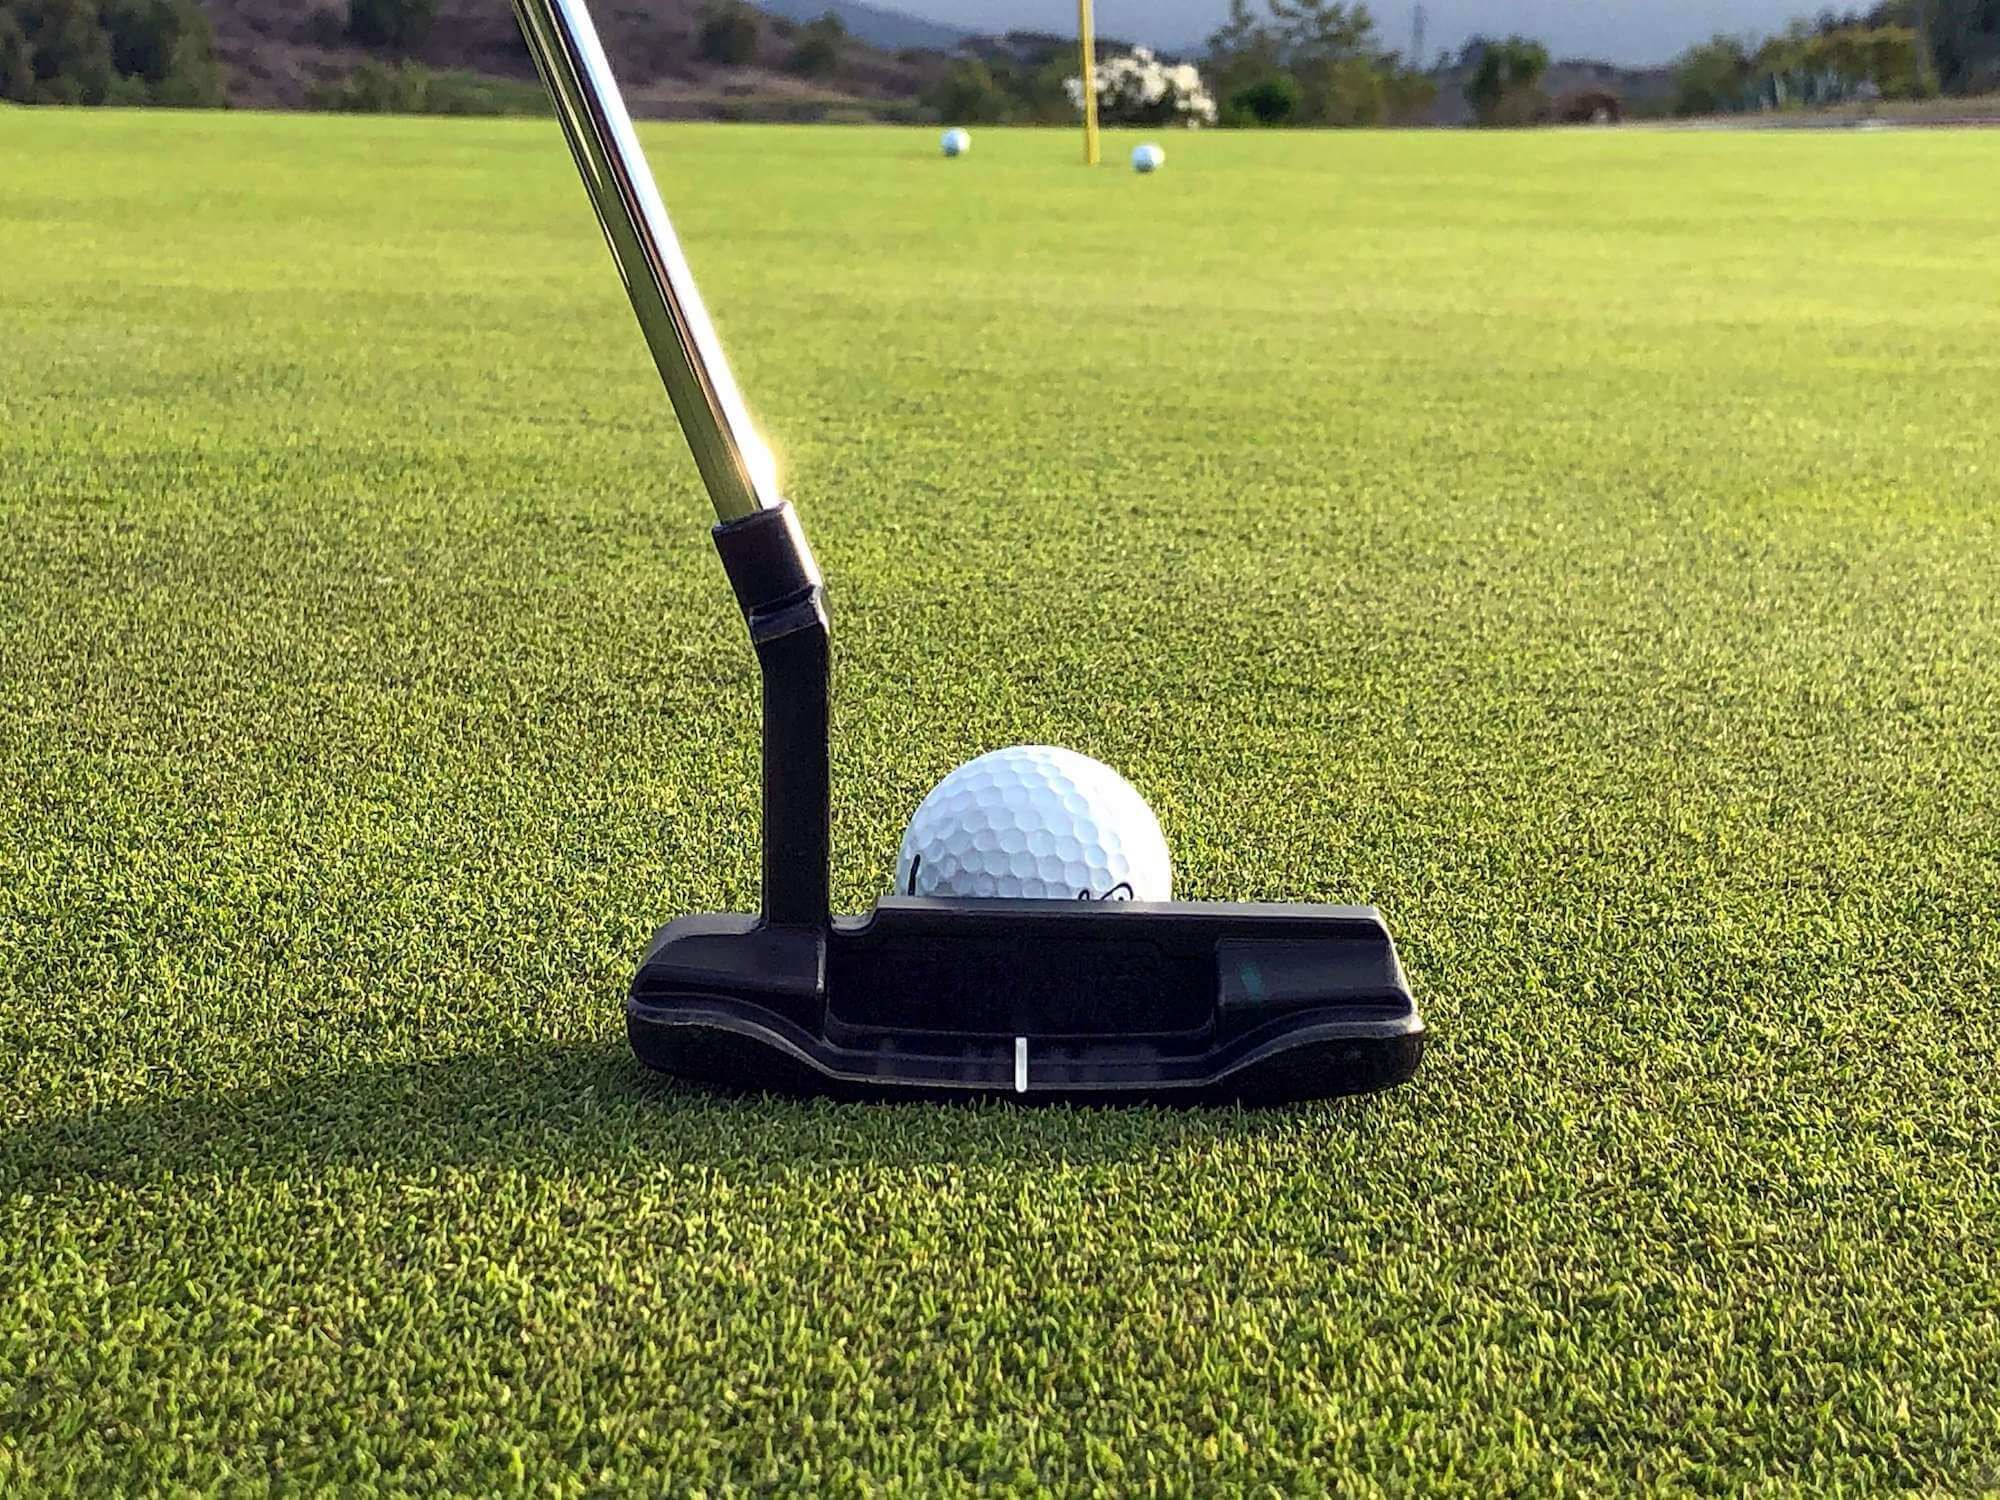 Blade Putter positioned next to golf ball on green